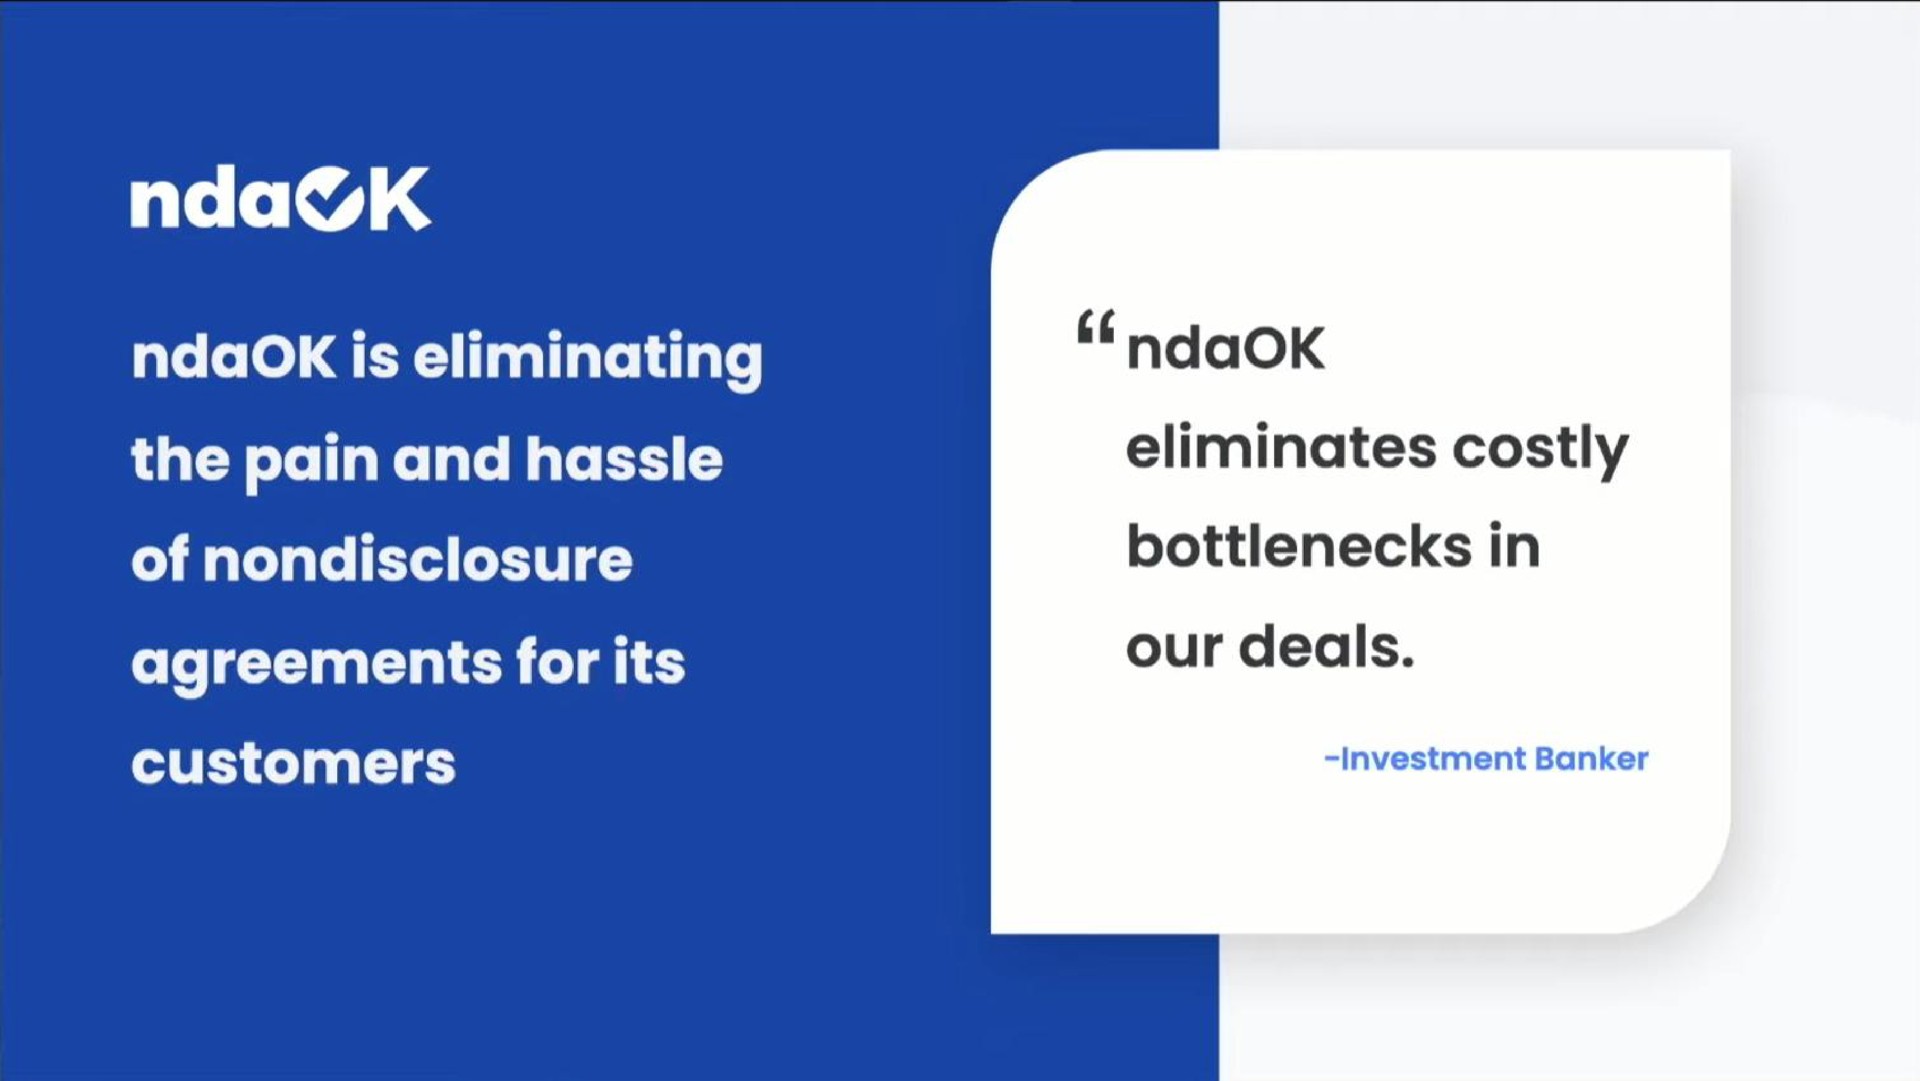 is eliminating the pain and hassle of nondisclosure agreements for its customers eliminates costly bottlenecks in our deals | ndaOK